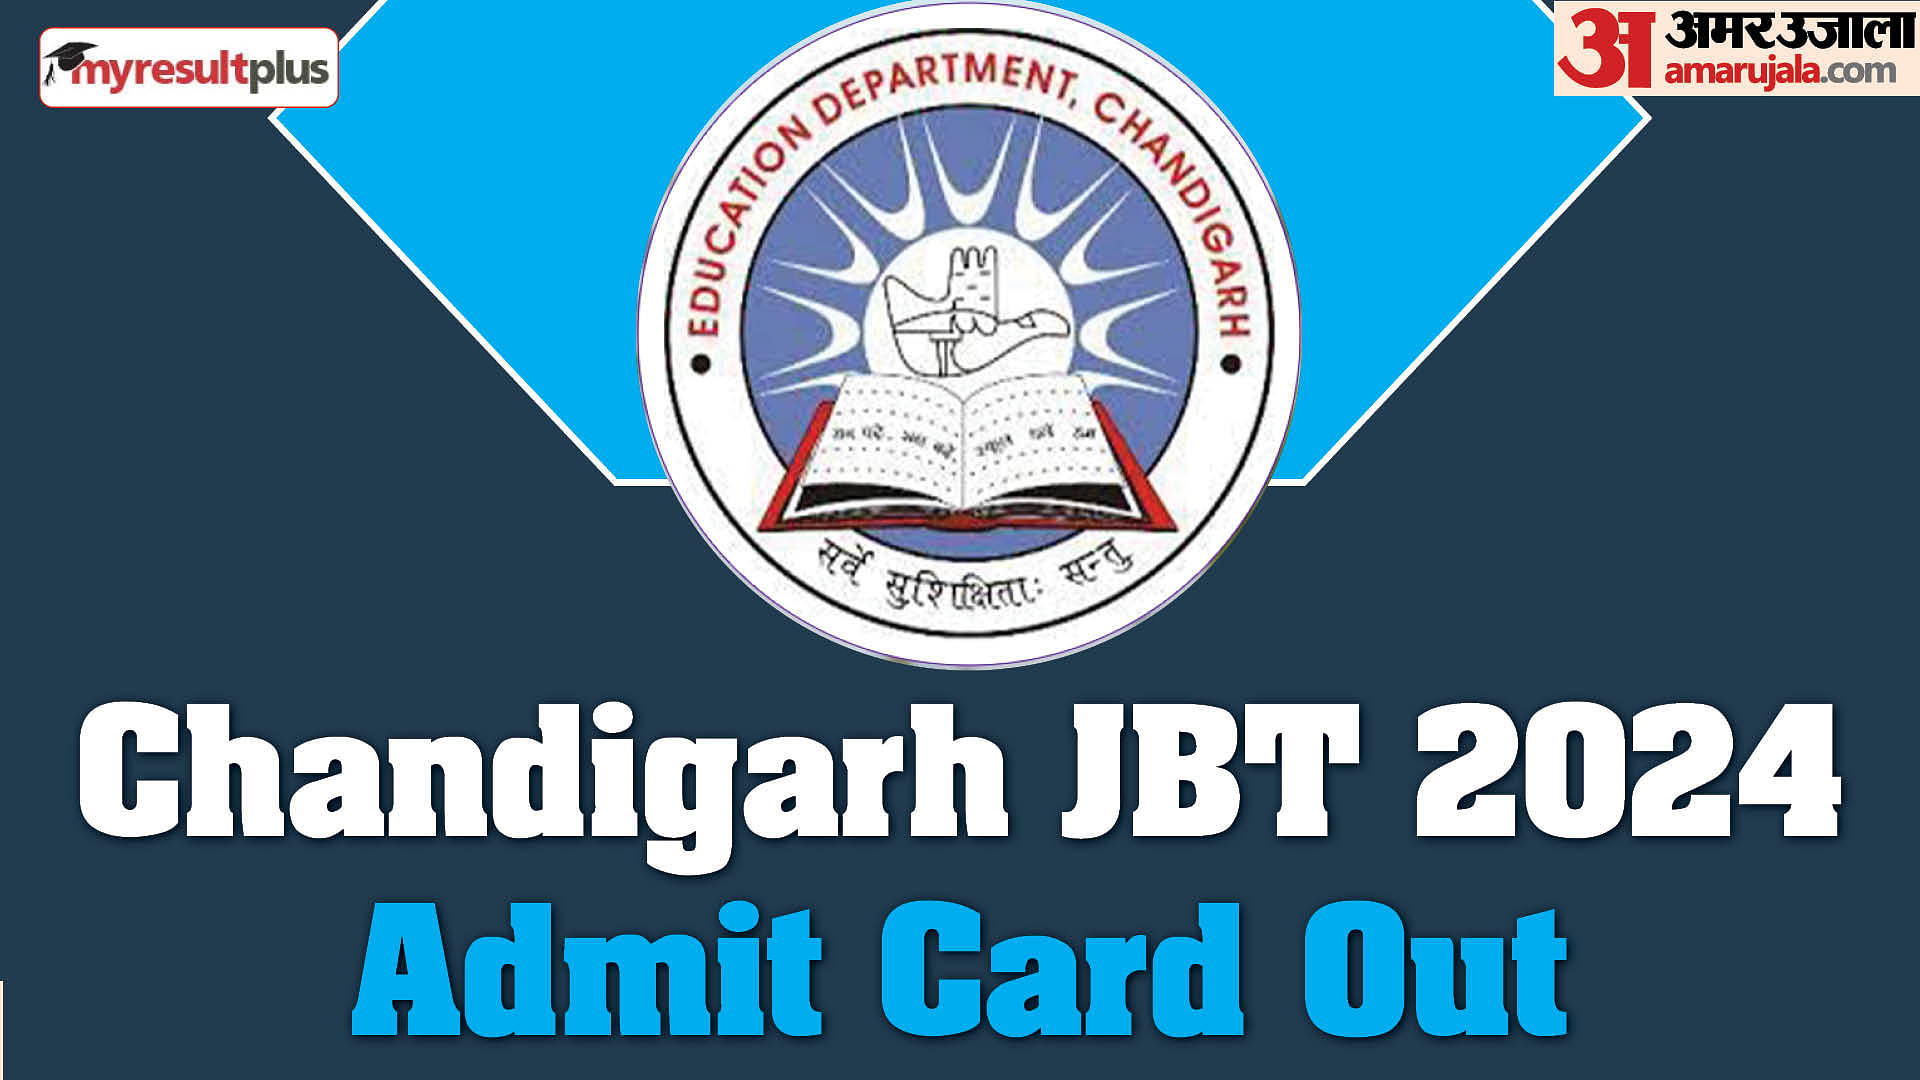 Chandigarh JBT Admit Card 2024 out now, Download the hall ticket from chdeducation.gov.in